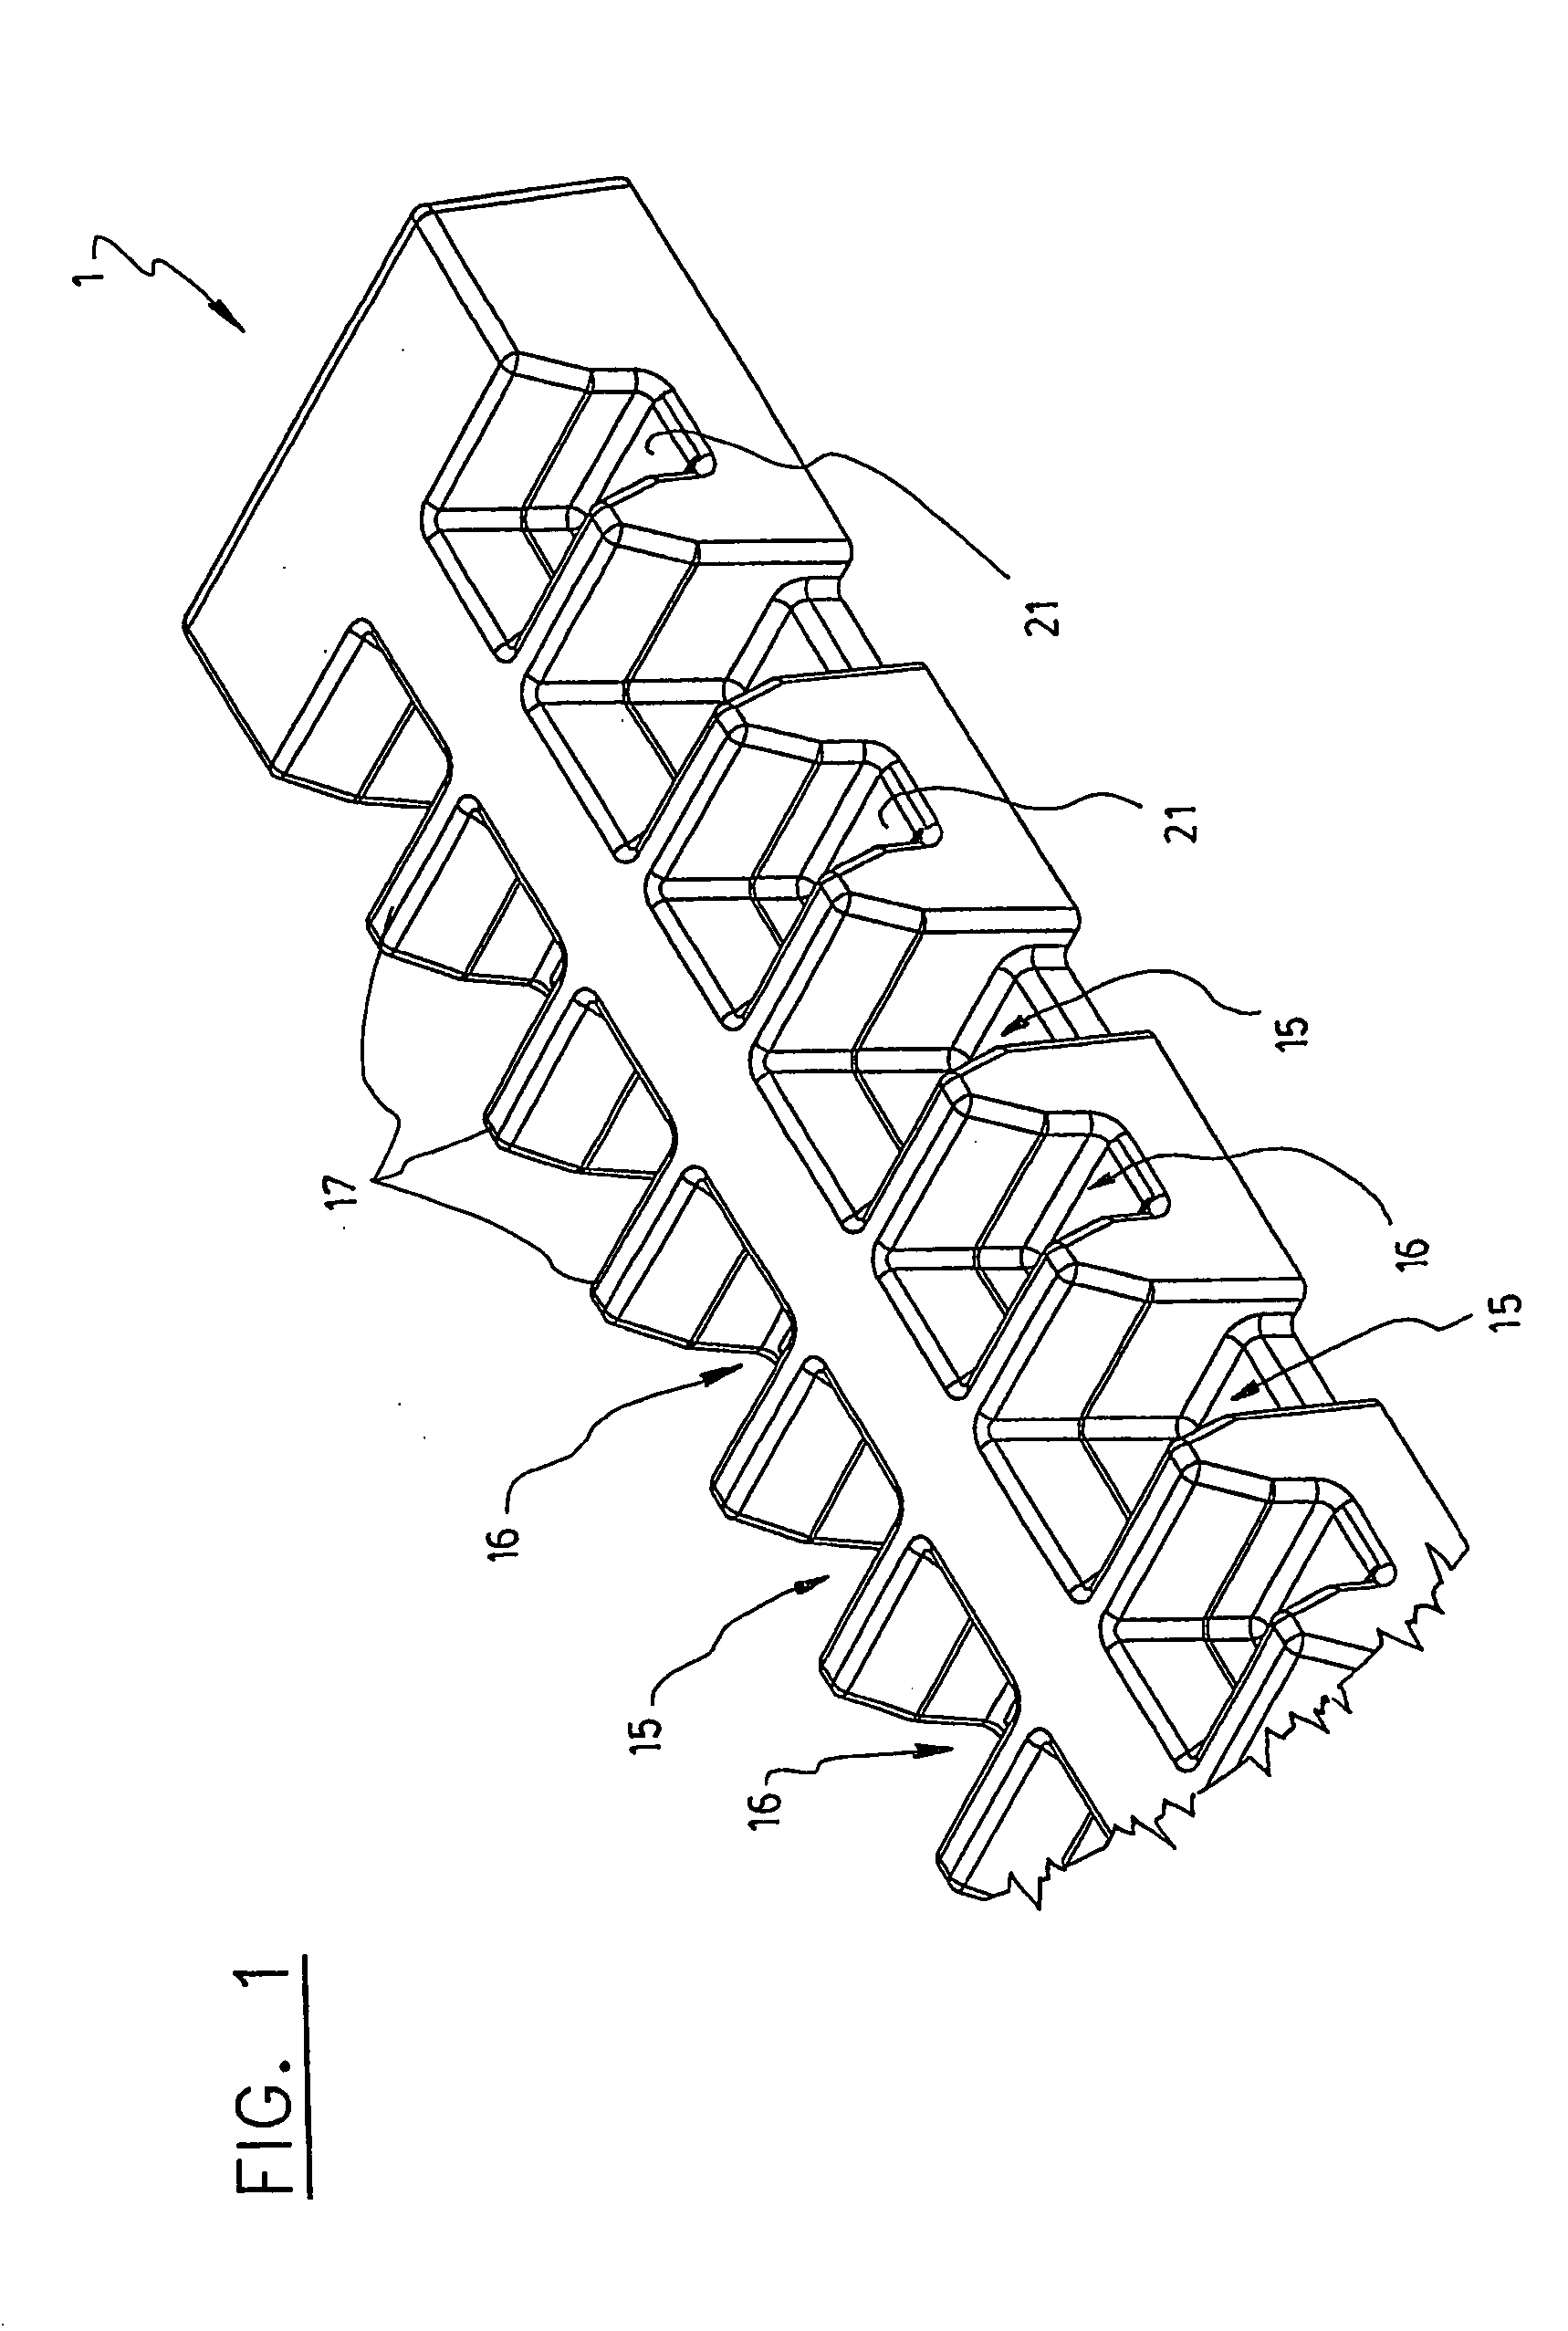 Capping board with at least one sheet of electrically conductive material embedded therein